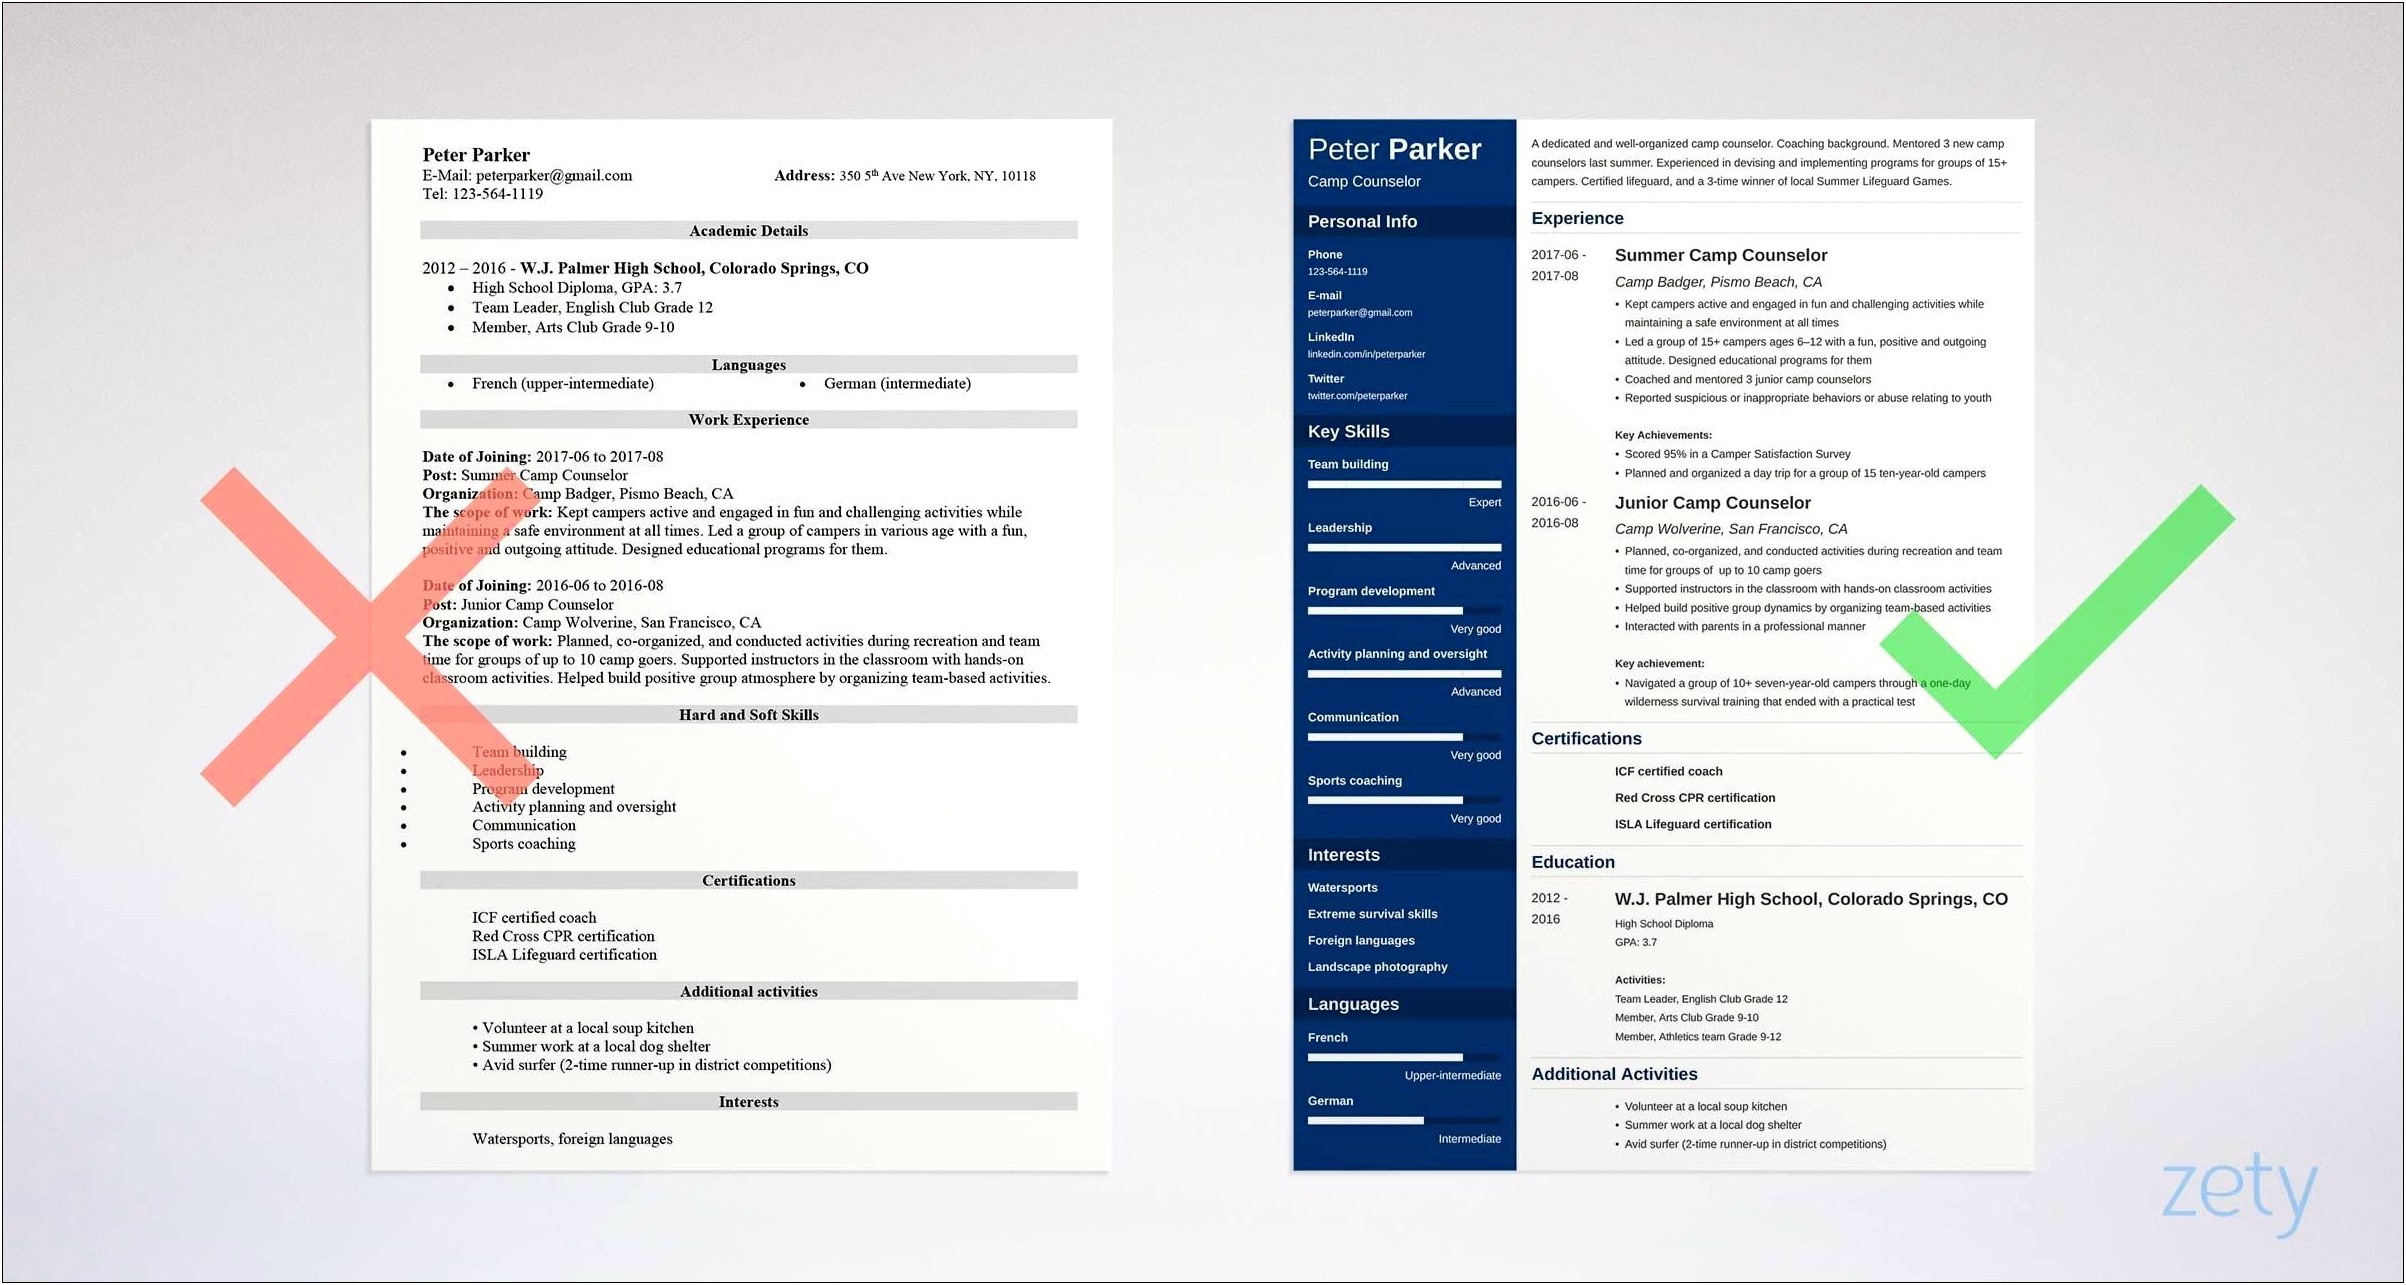 Resume Samples For Youth Development Counselor